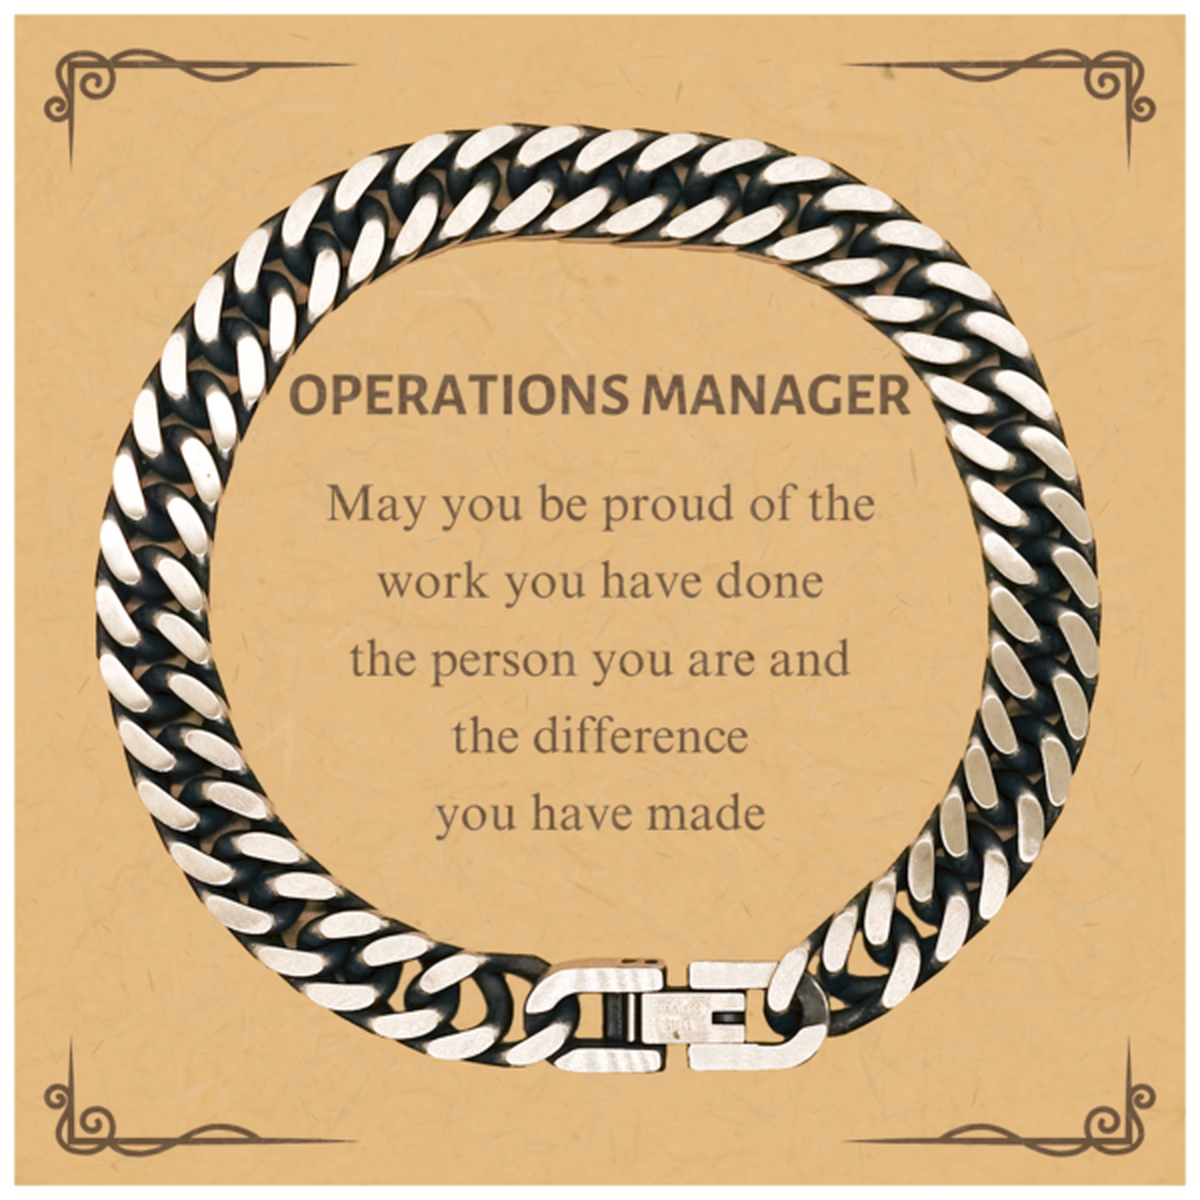 Operations Manager May you be proud of the work you have done, Retirement Operations Manager Cuban Link Chain Bracelet for Colleague Appreciation Gifts Amazing for Operations Manager